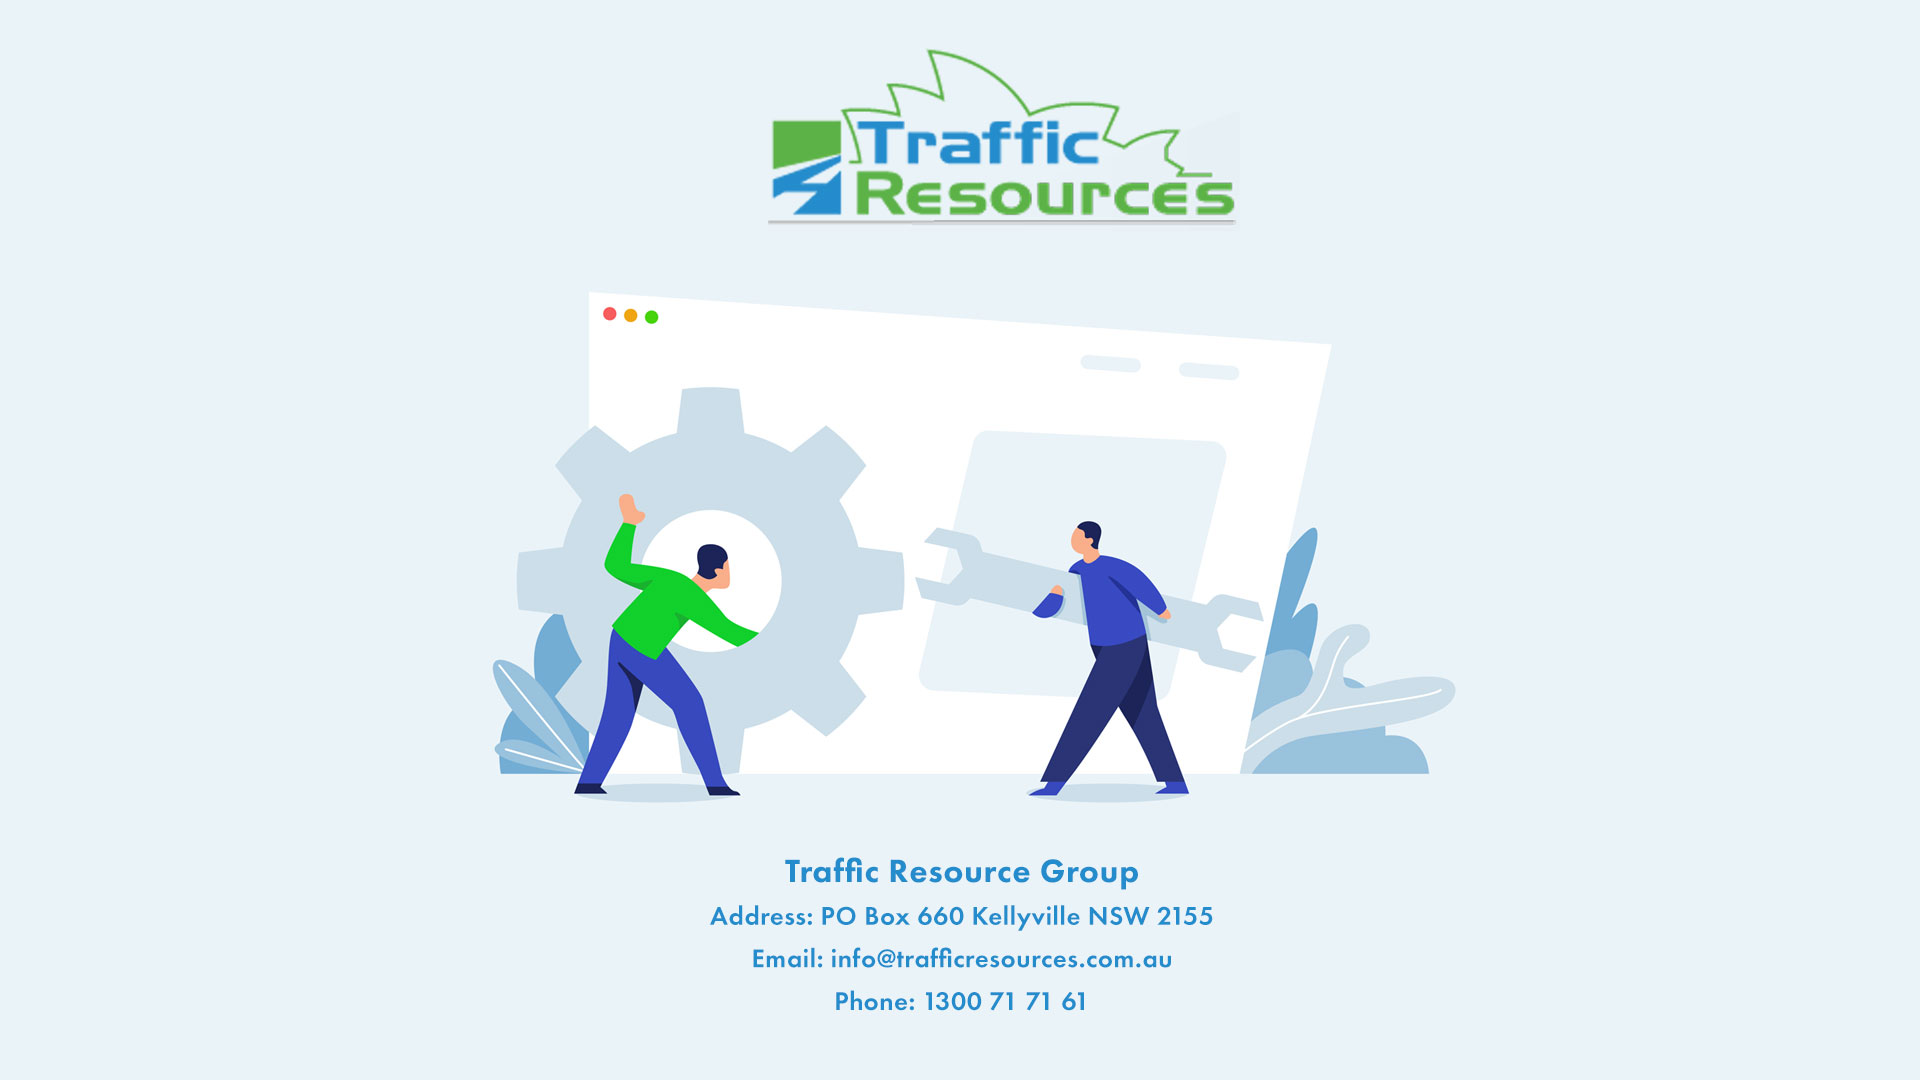 Traffic Resources Group